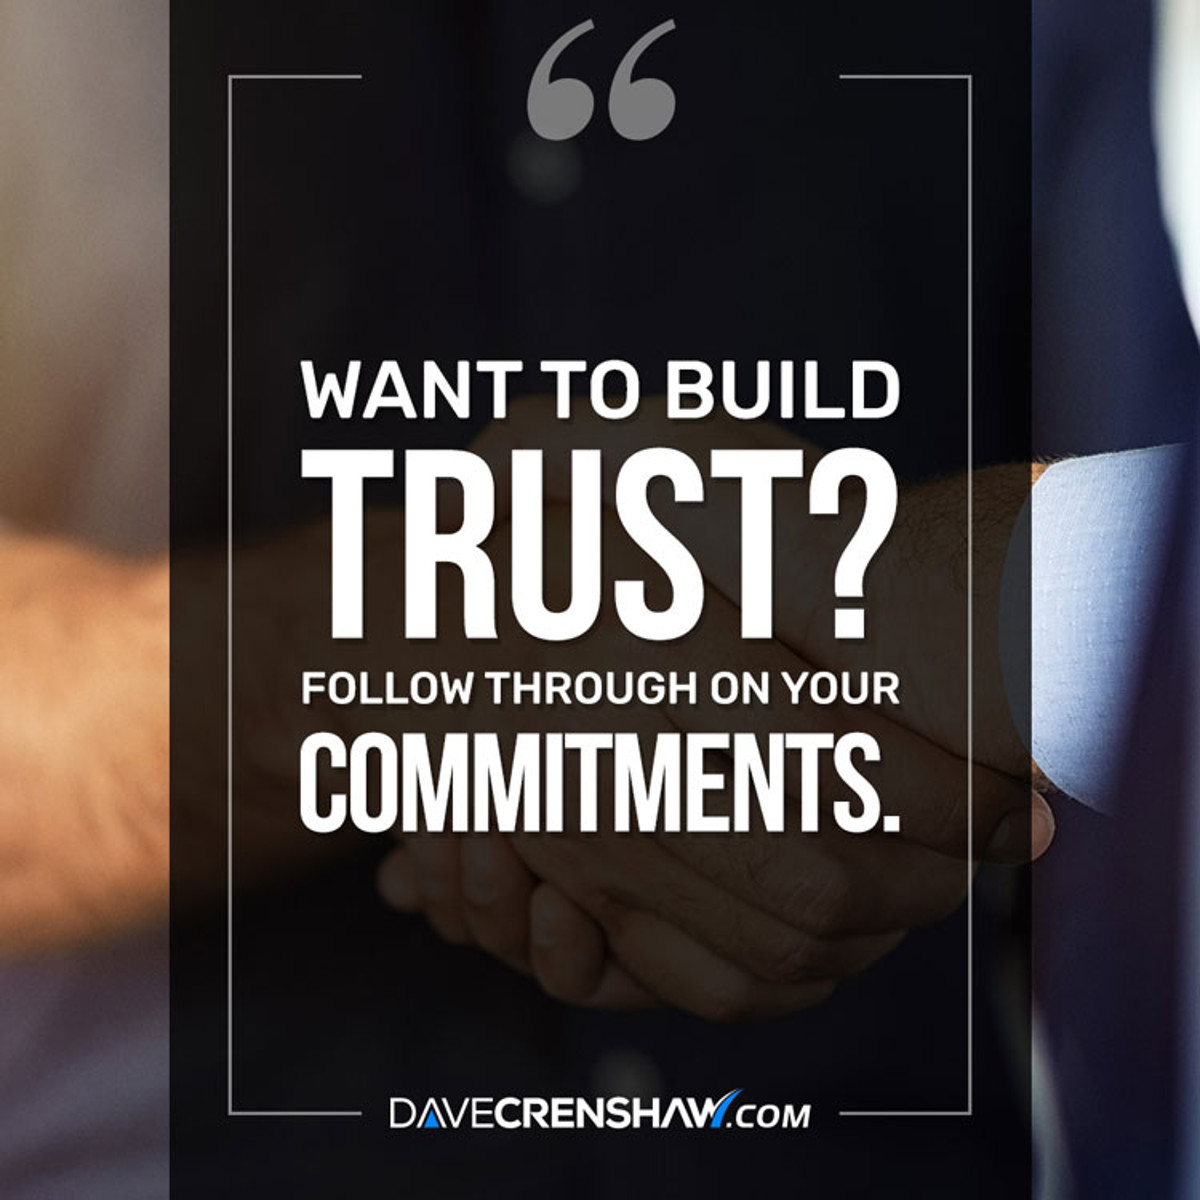 Want to build trust? Follow through on your commitments.